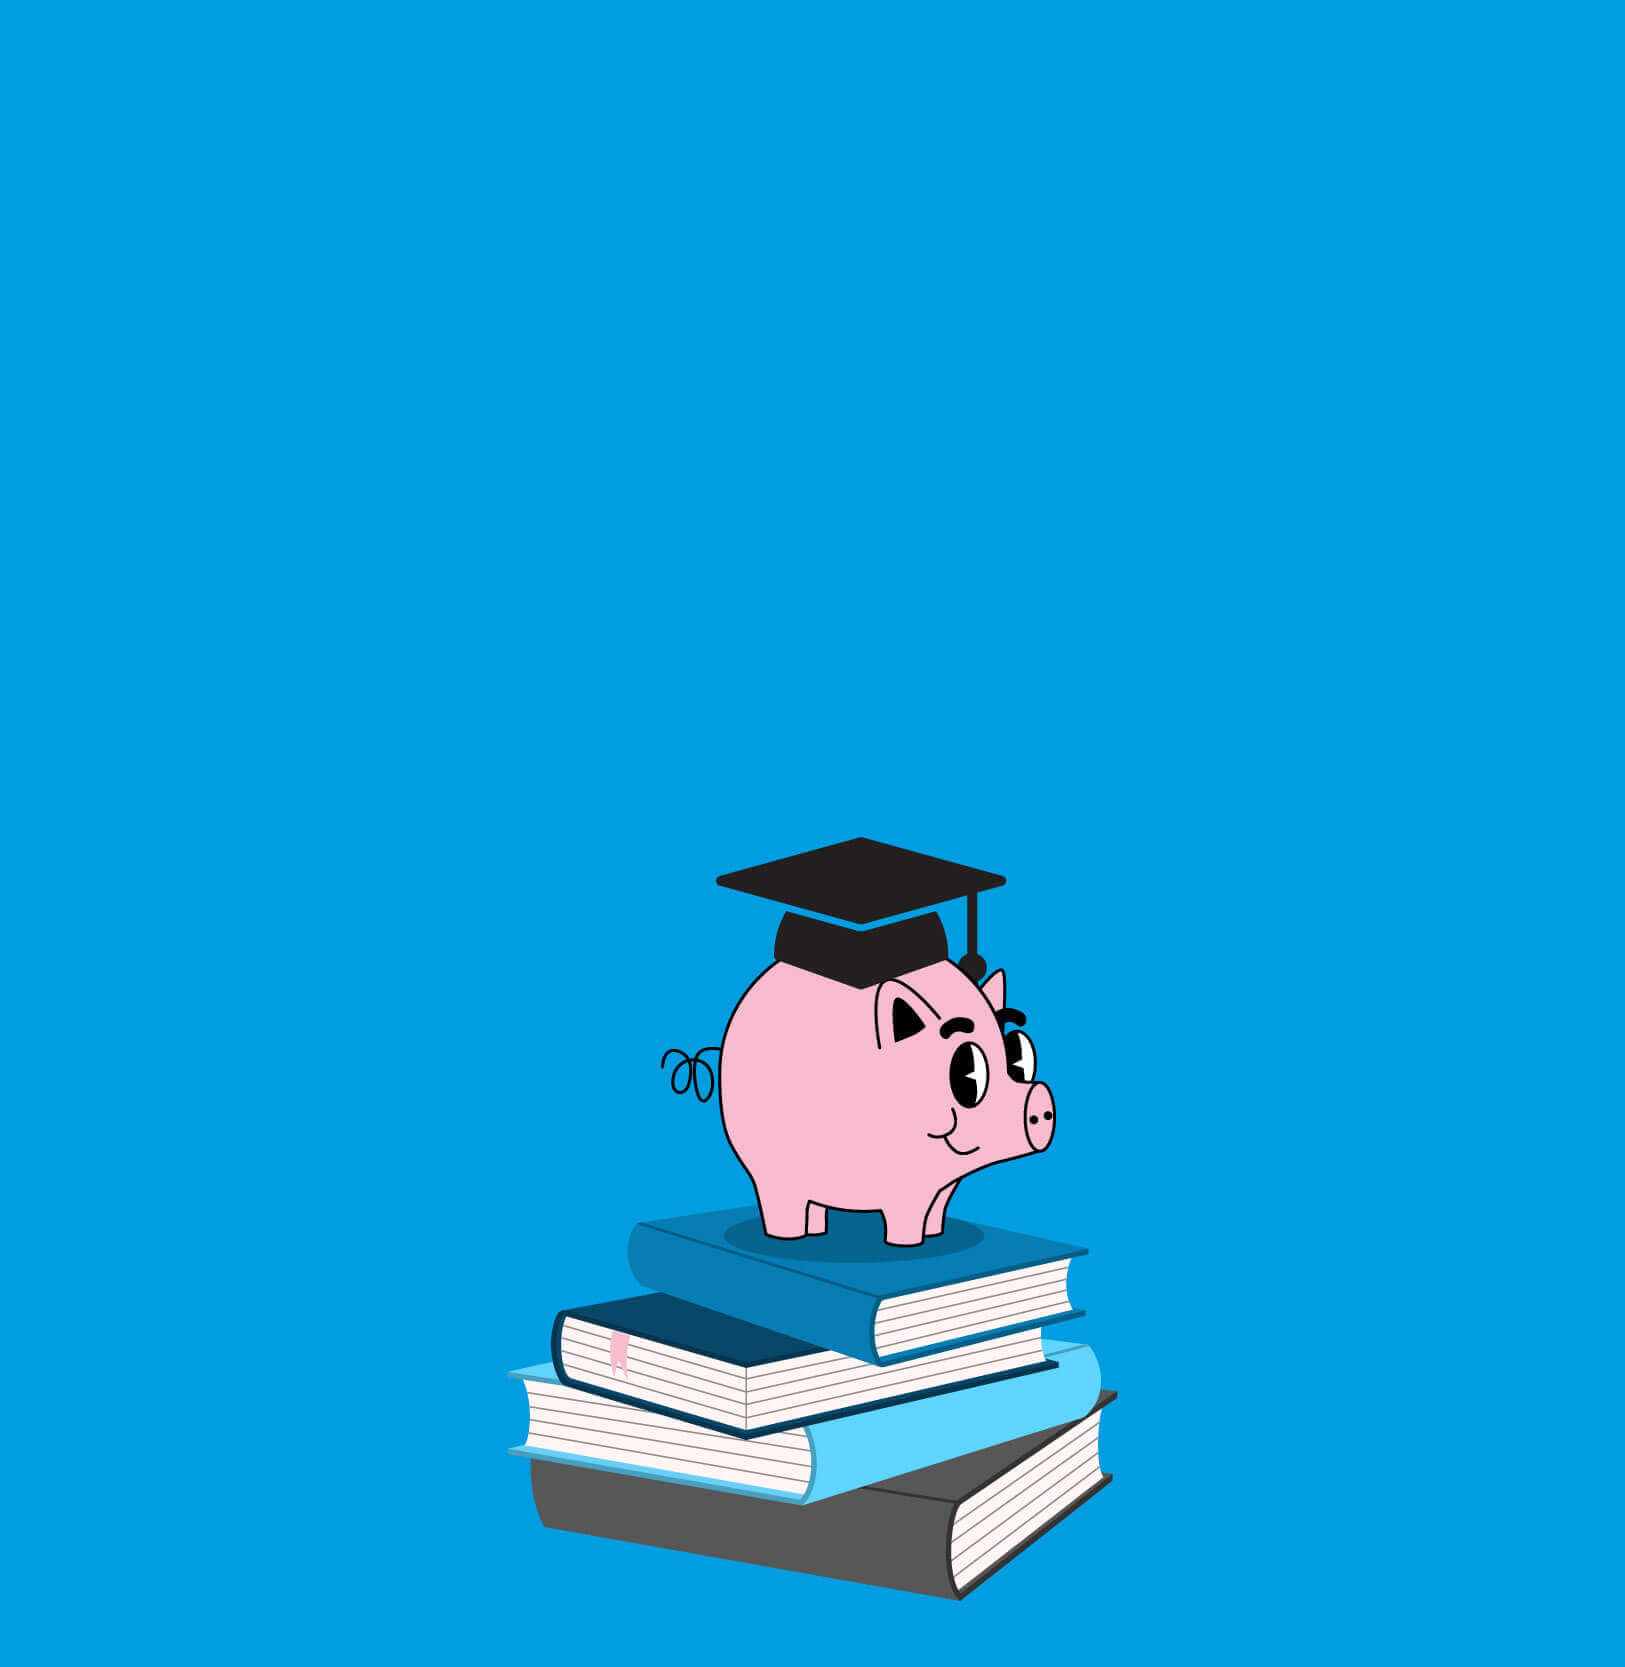 Cartoony graphic of a piggy bank standing on top of a pile of textbooks.